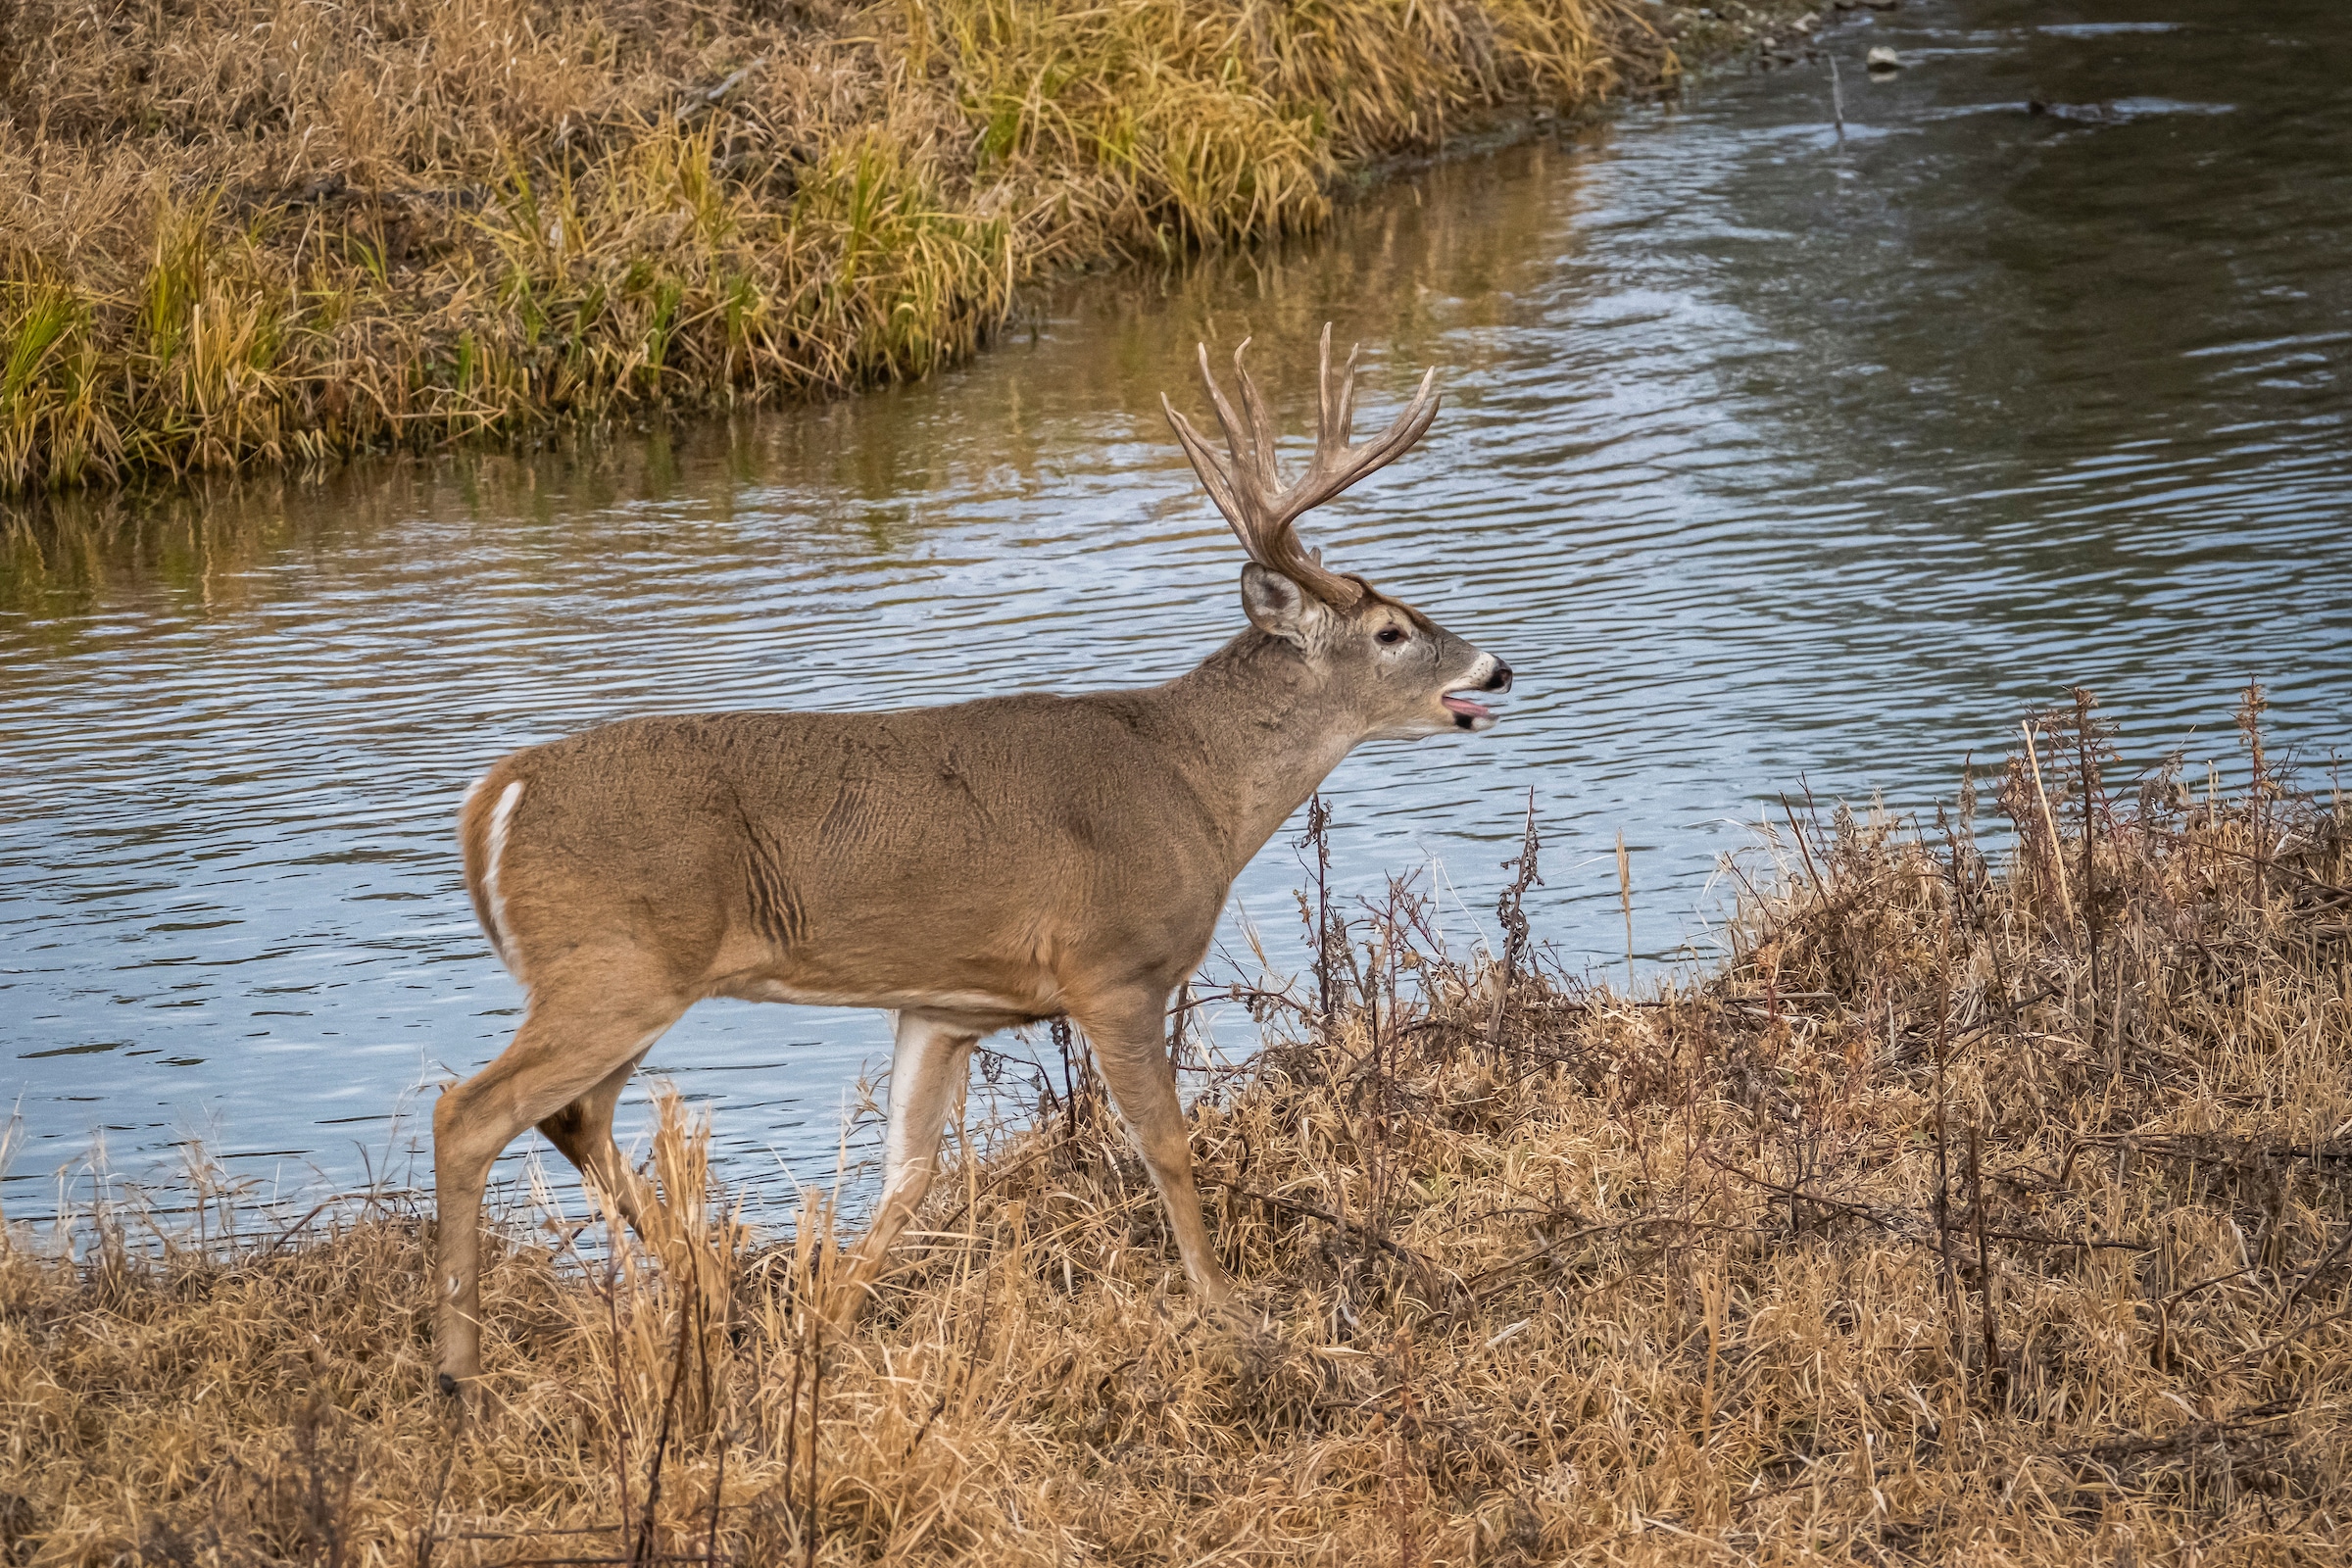 A little sweat equity will go a long way. Even if your property has running water, dig in a pond or two, and deer will flock to it.